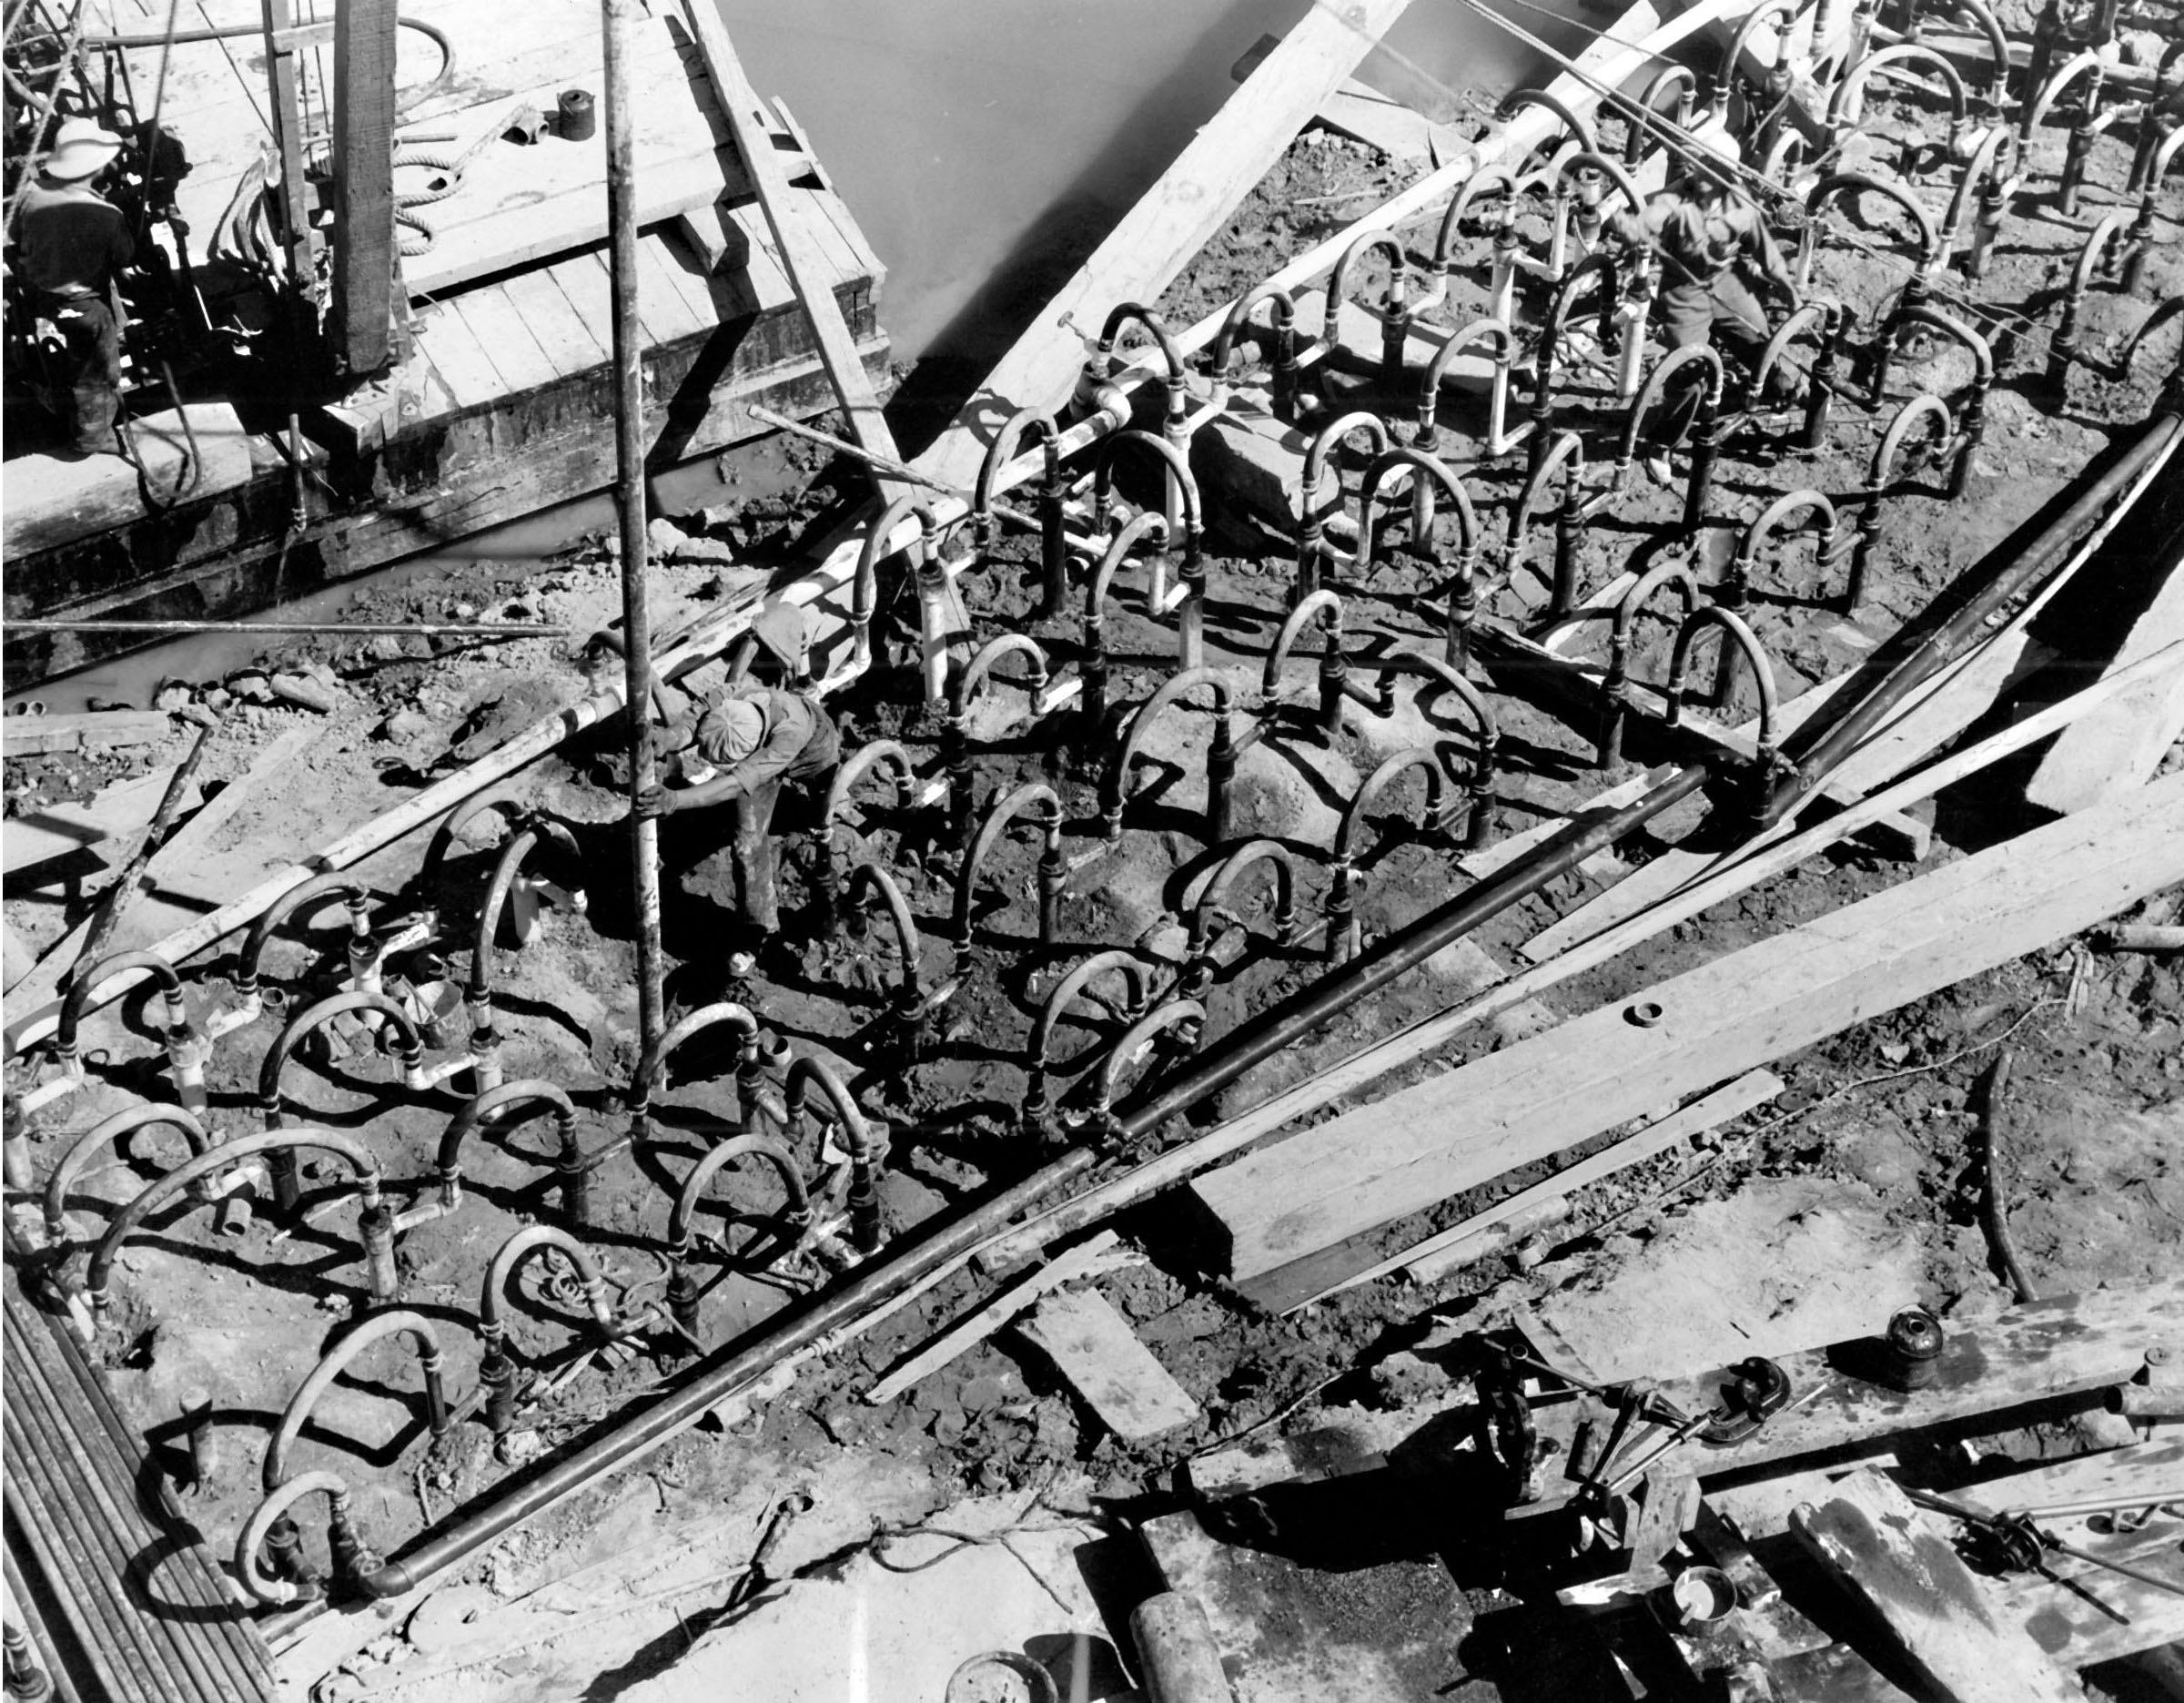 Photo taken August 27, 1936. Close-up of connections on arch area. One point being driven by barge.